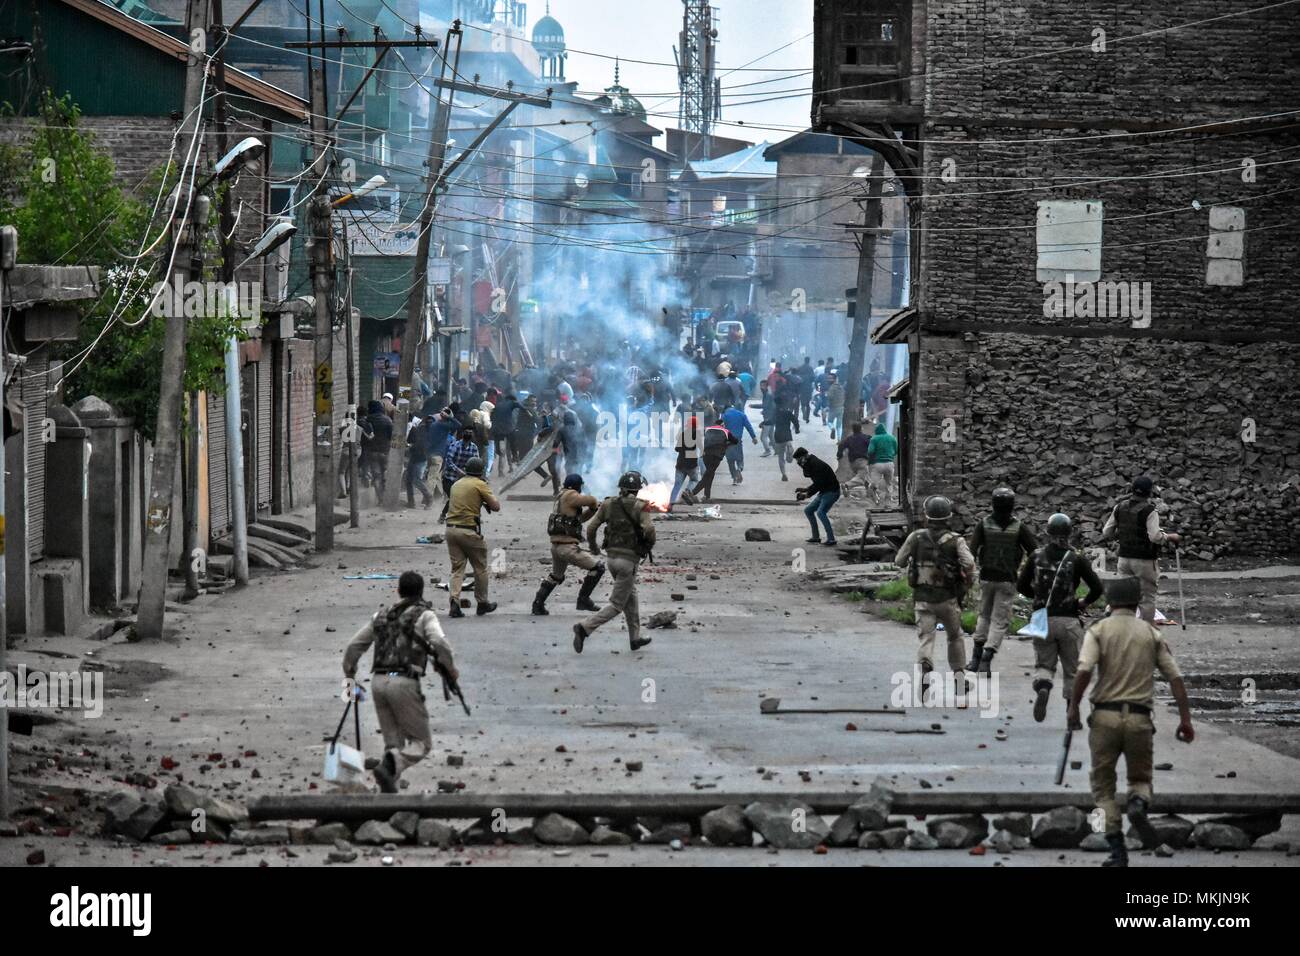 Srinagar, Kashmir. 8th May 2018. government forces chase Kashmiri protesters during clashes in Srinagar, Kashmir. Fierce clashes broke out between government forces and Kashmiri protesters in Srinagar on Tuesday as the valley continued to remain tense over the killing of 11 people including 5 militants and 6 civilians in Kashmir. Police used tear smoke shells and shot gun pellets to disperse hundreds of demonstrators who hurled rocks and chanted anti-and pro-freedom slogans. Credit: SOPA Images Limited/Alamy Live News Stock Photo